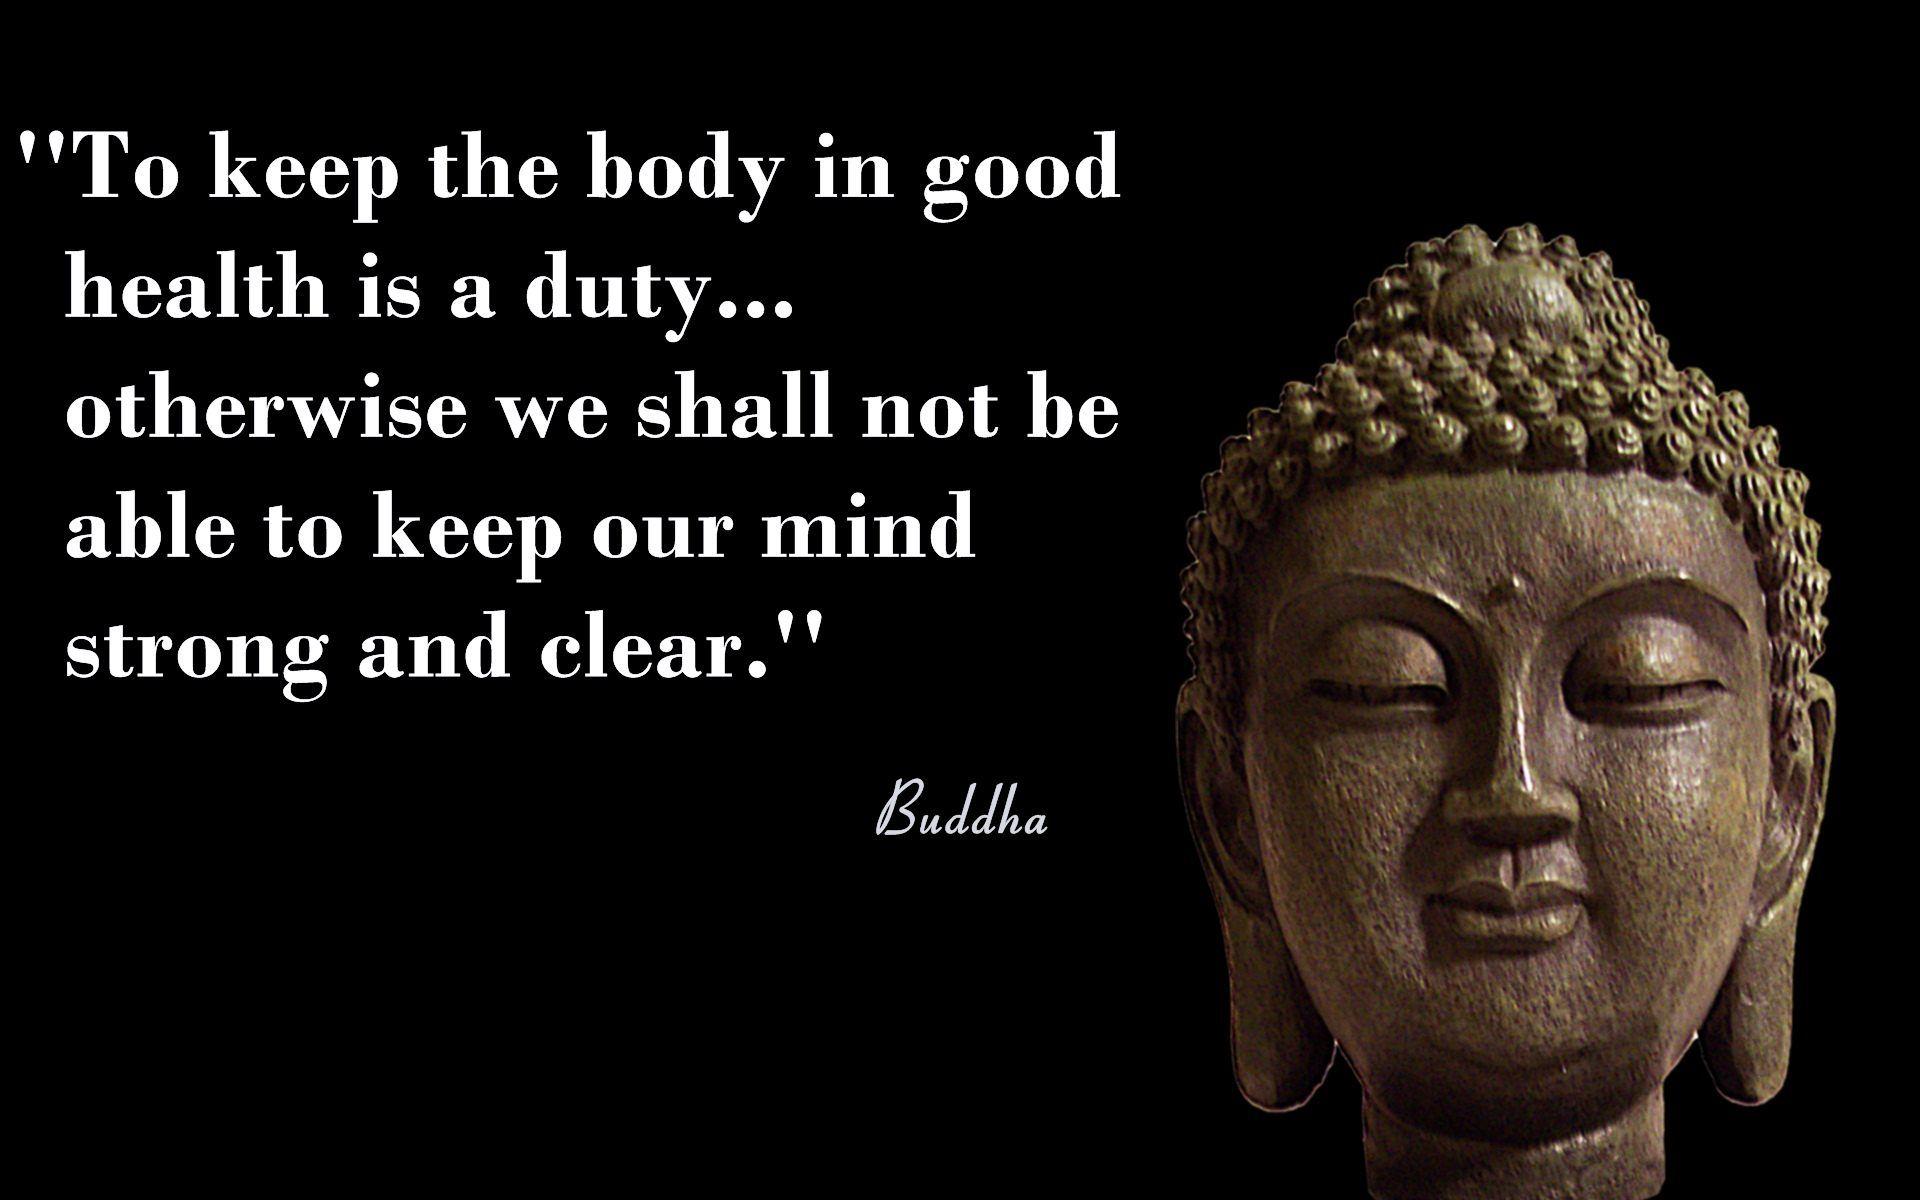 Gautama Buddha Quotes. QUOTES OF THE DAY